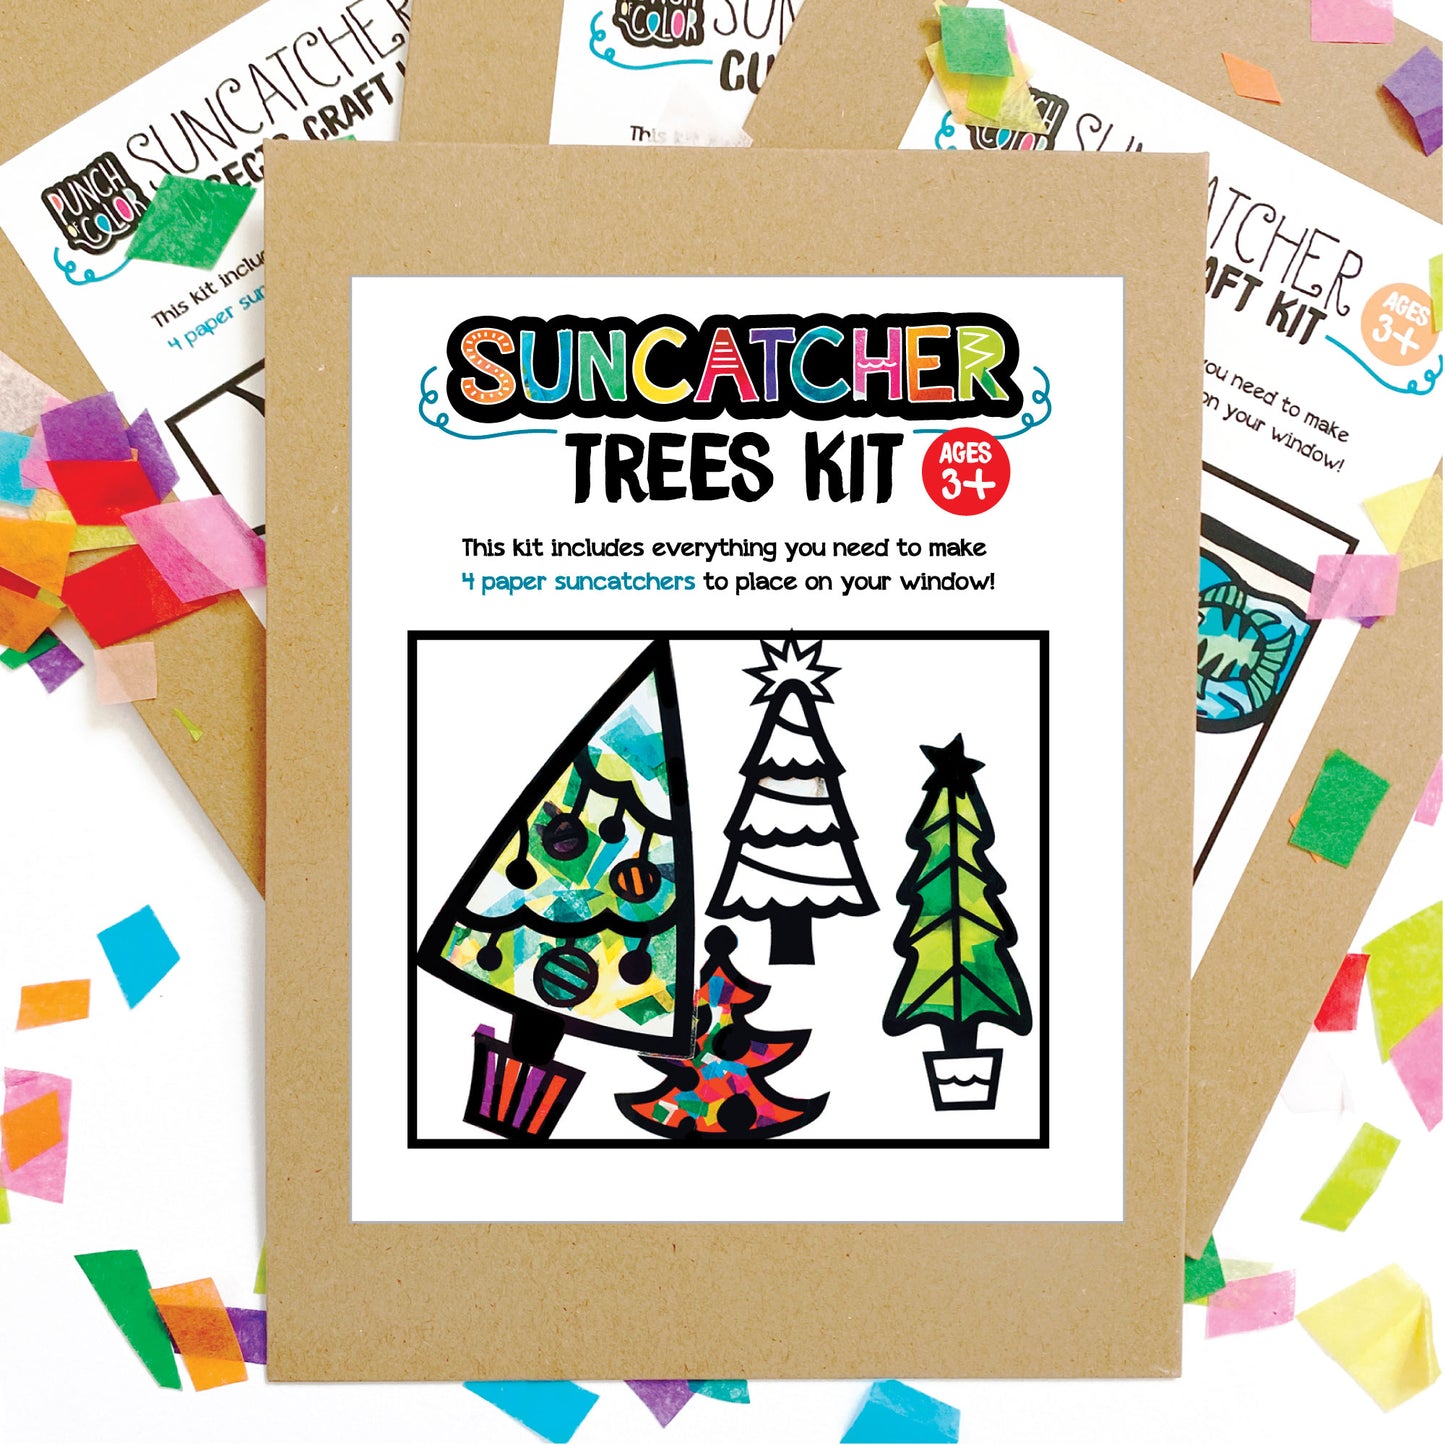 Christmas Trees suncatcher arts and crafts kit, a mess-free paper based activity for toddlers and kids.